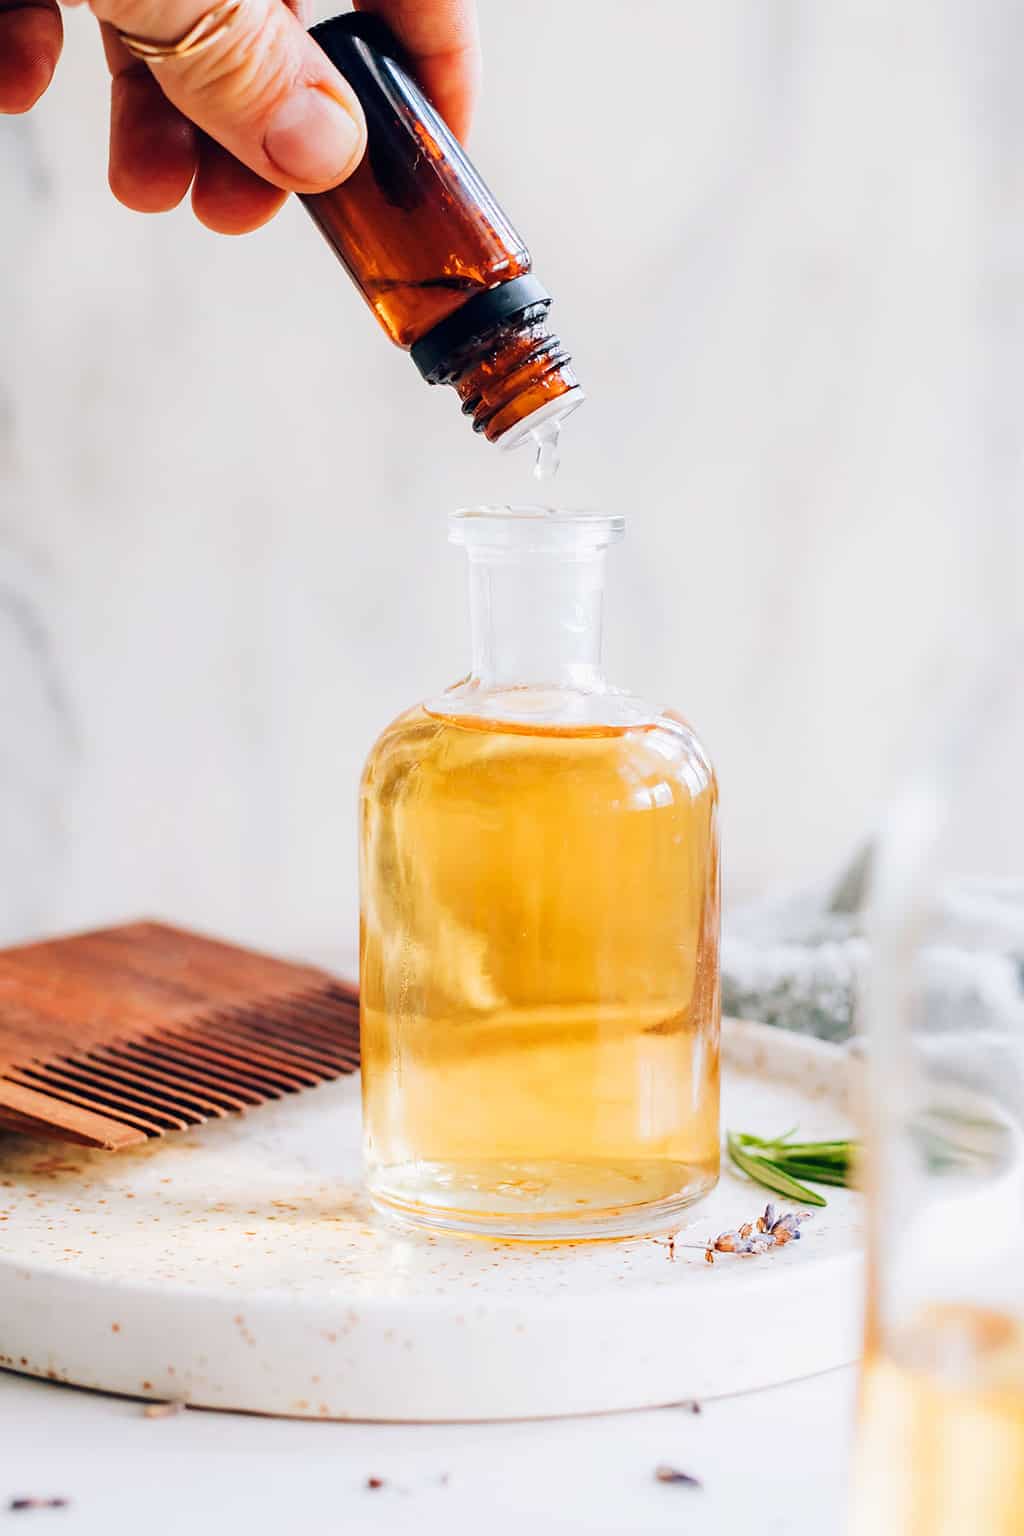 Castor oil and essential oils to help grow hair